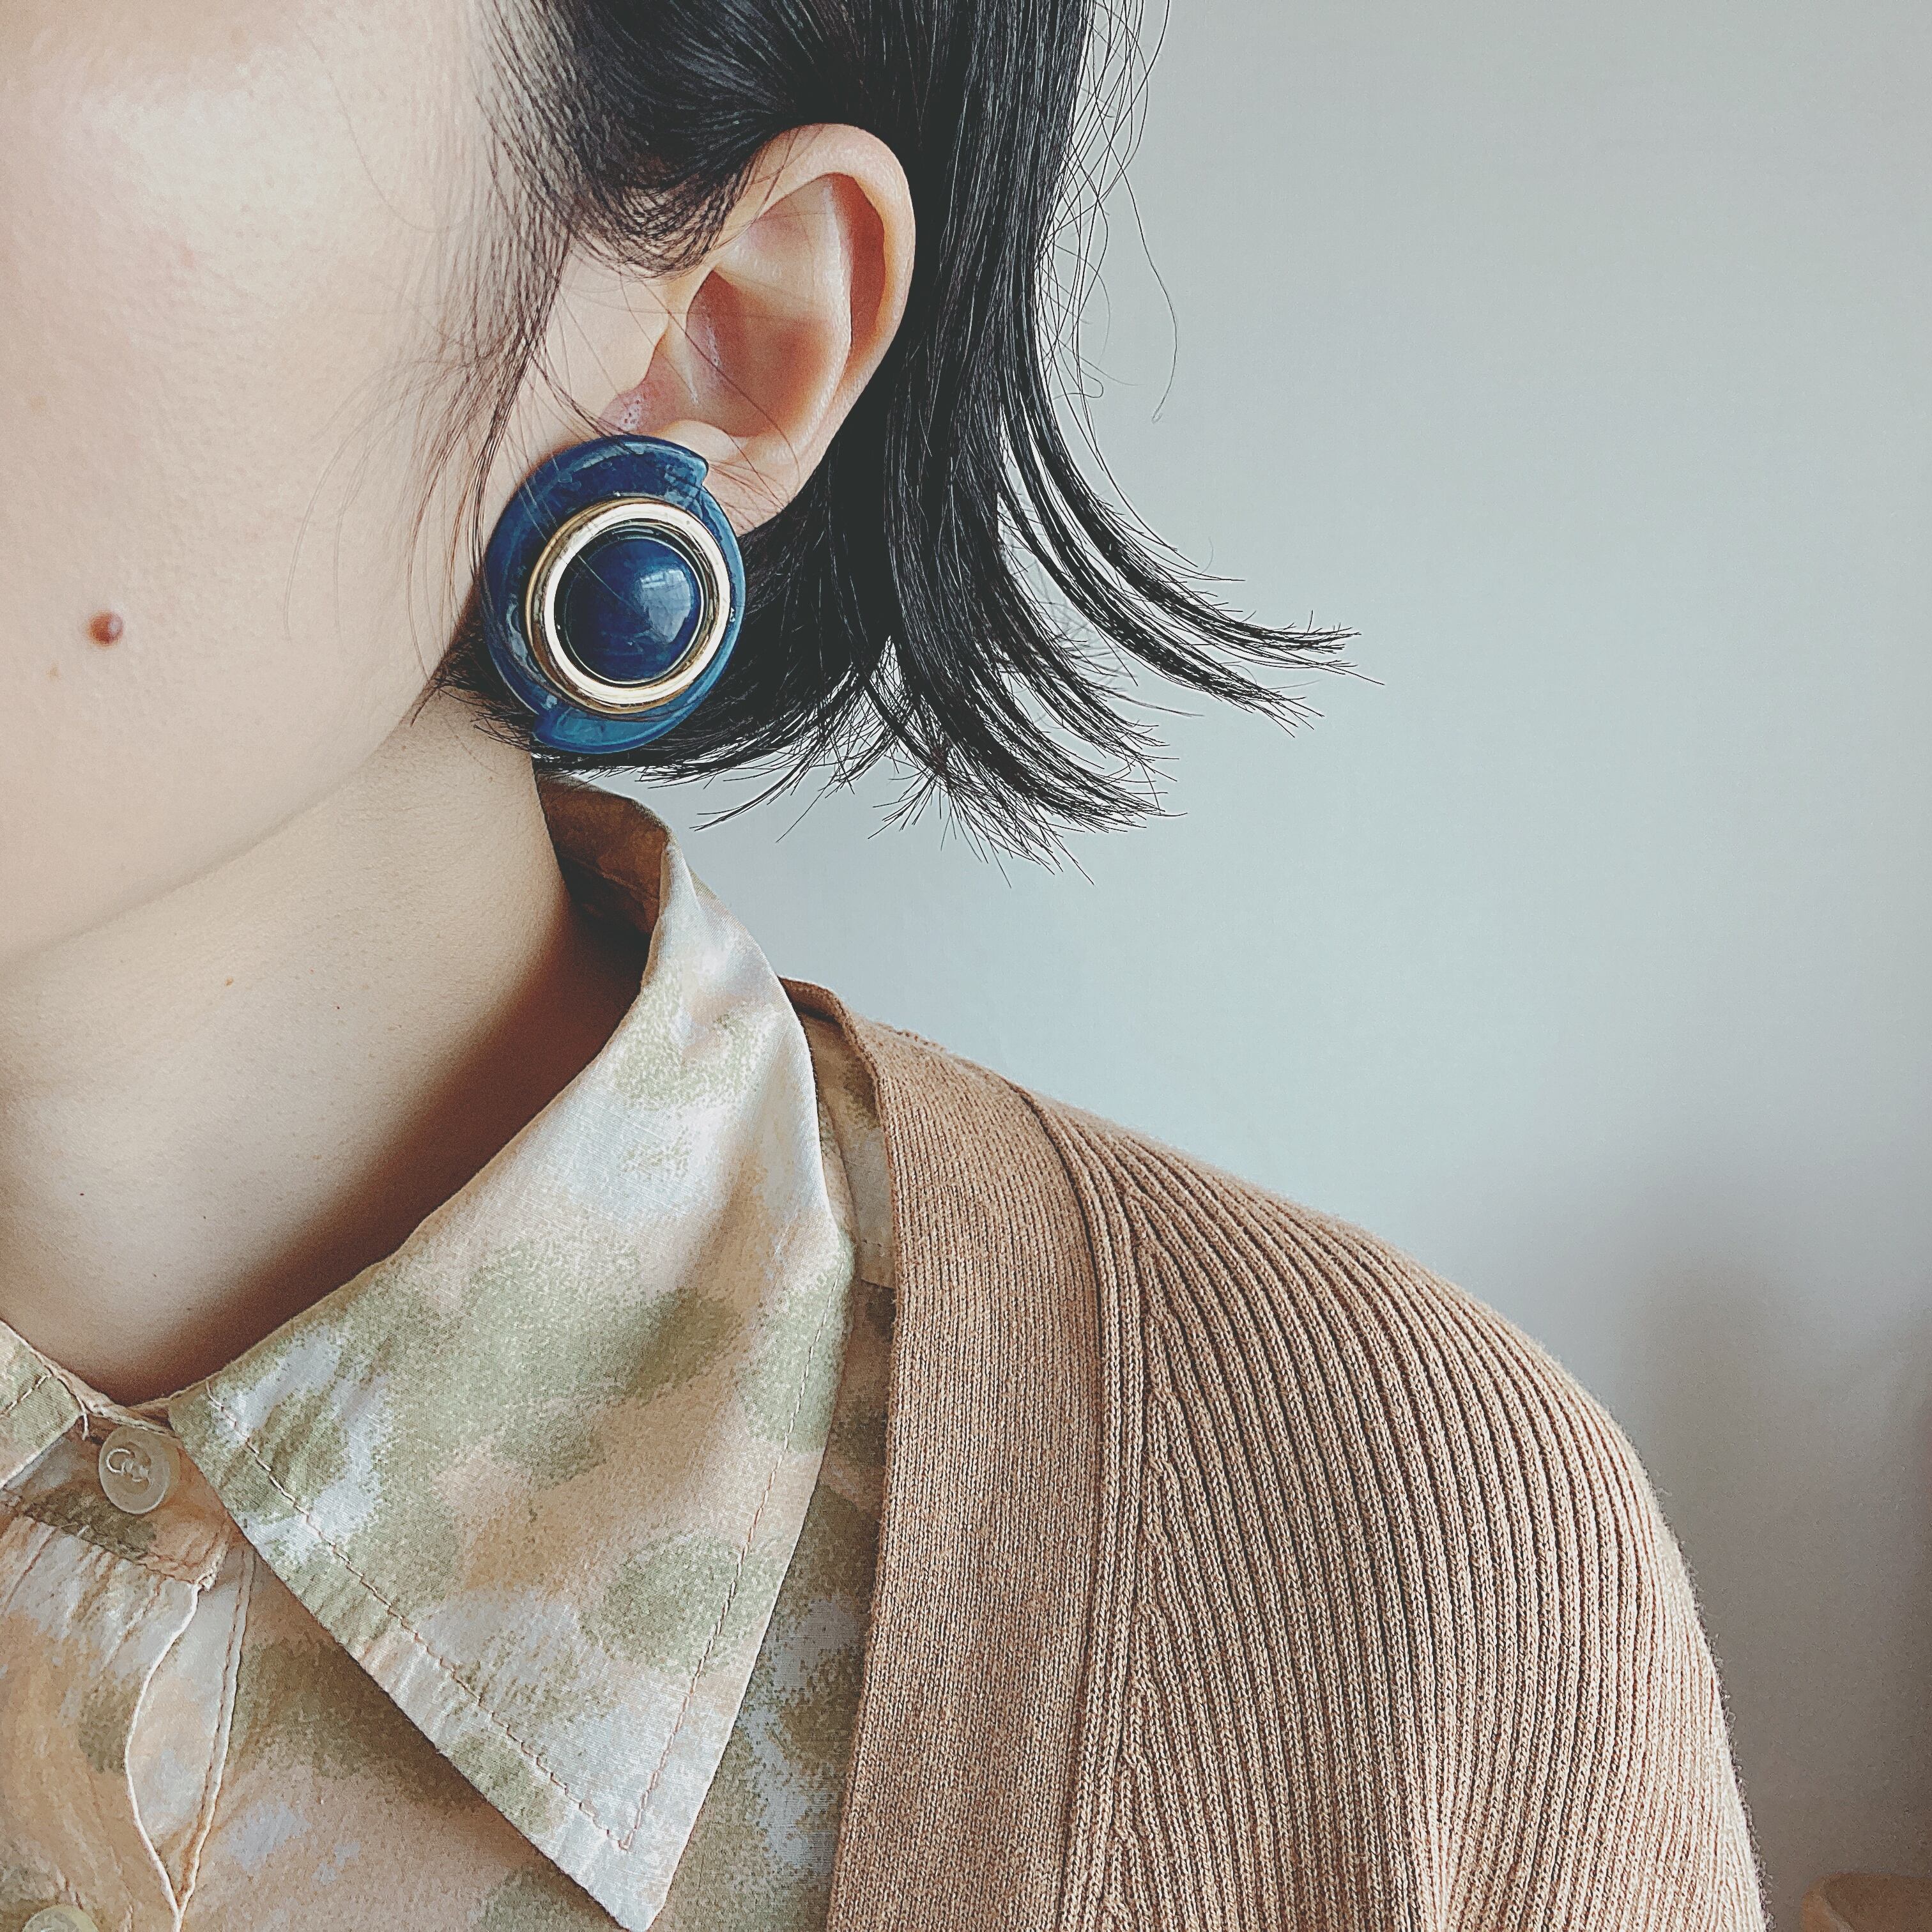 Vintage 60s - 80s blue acrylic gold line earrings ヴィンテージ　60年代 - 80年代　ブルー　 ゴールド　ライン　イヤリング　b951 | OBAKEPEACH powered by BASE